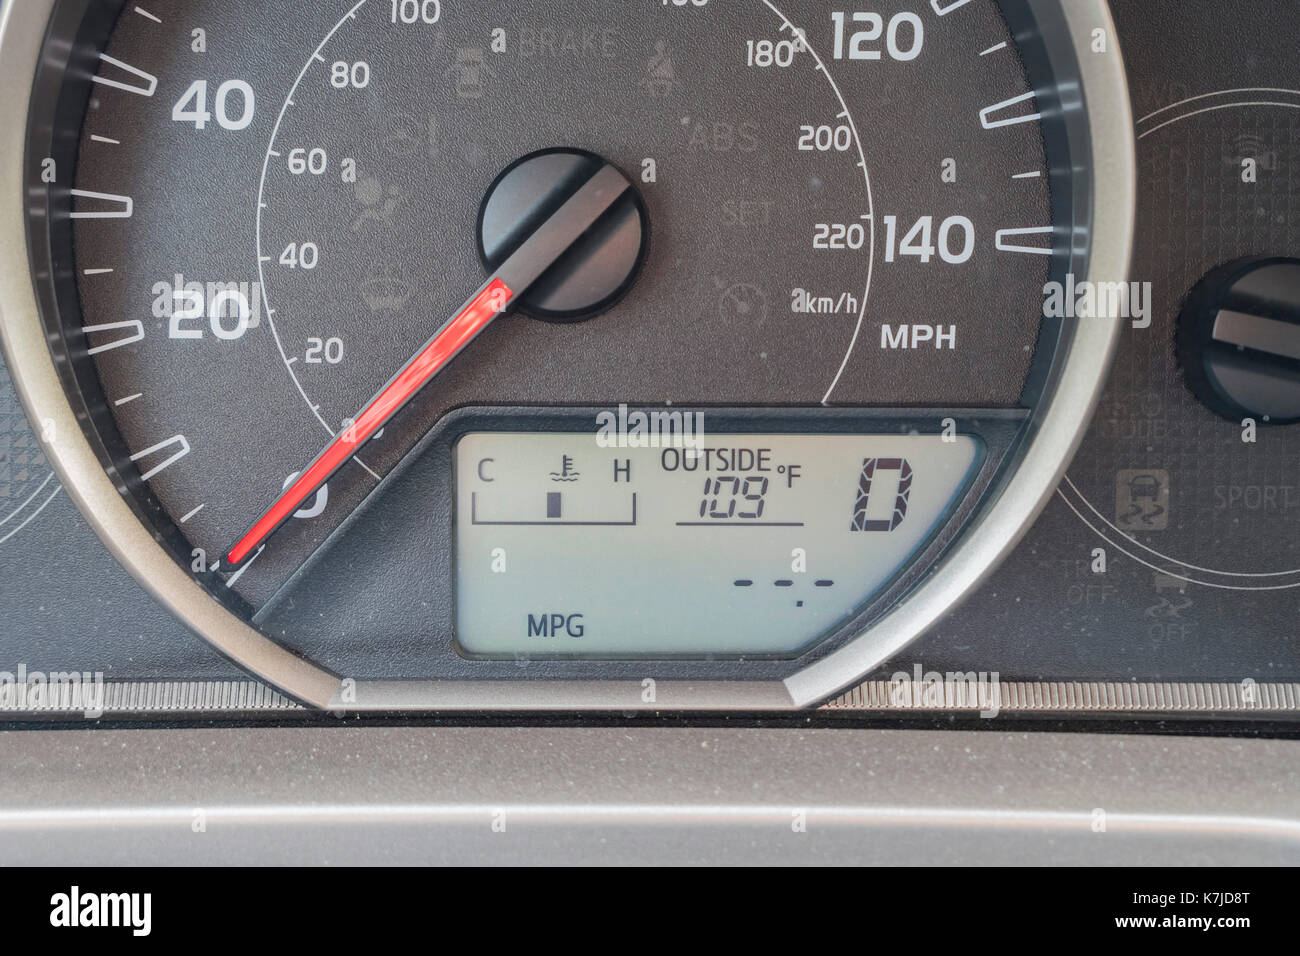 Extreme hot as shown on the dashboard, Los Angeles, California, U.S.A. Stock Photo